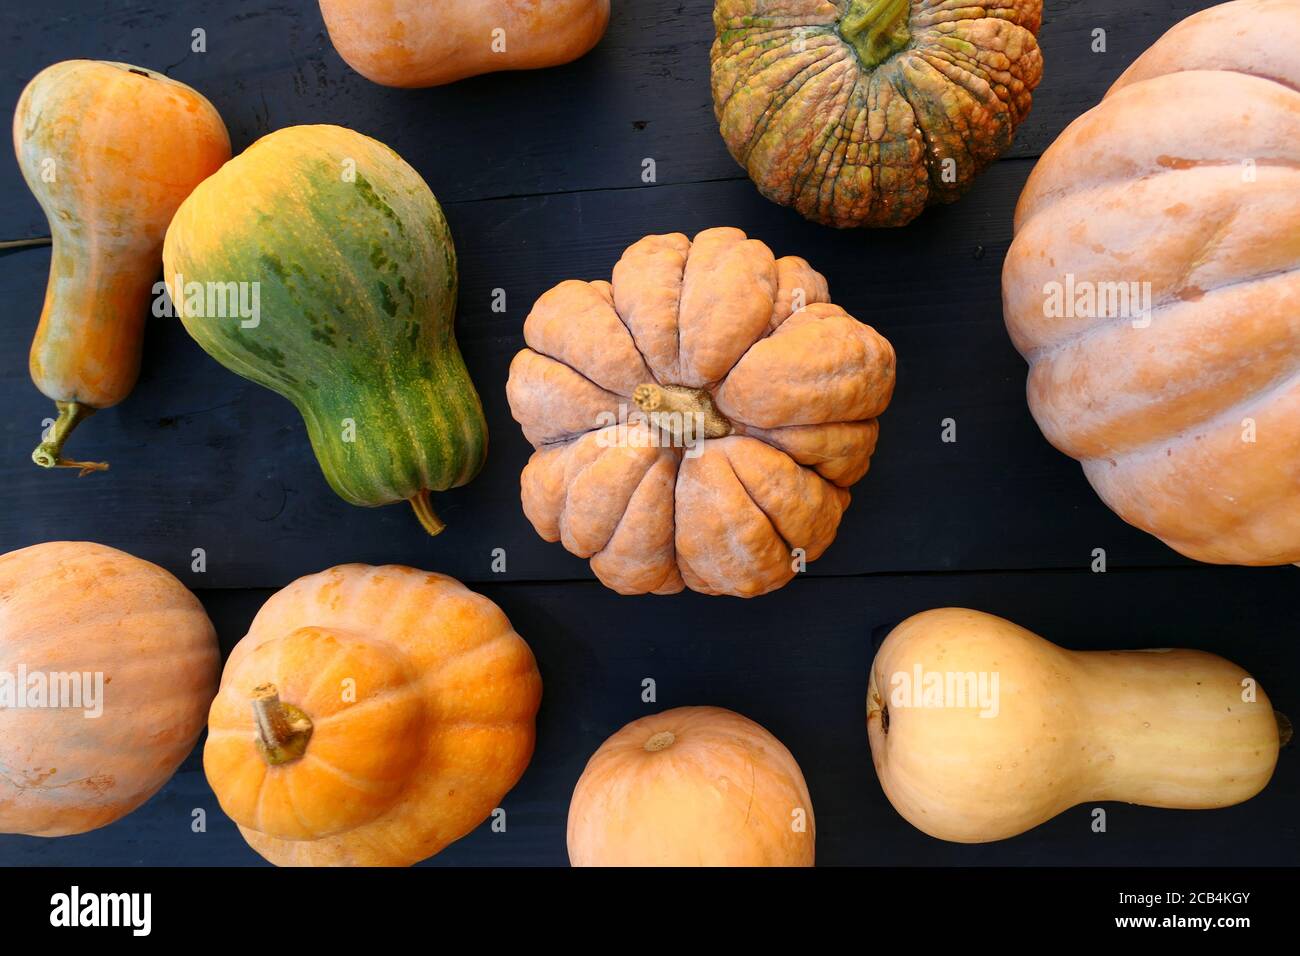 Cucurbita moschata winter squashes and pumpkins varieties on black wooden boards background Stock Photo